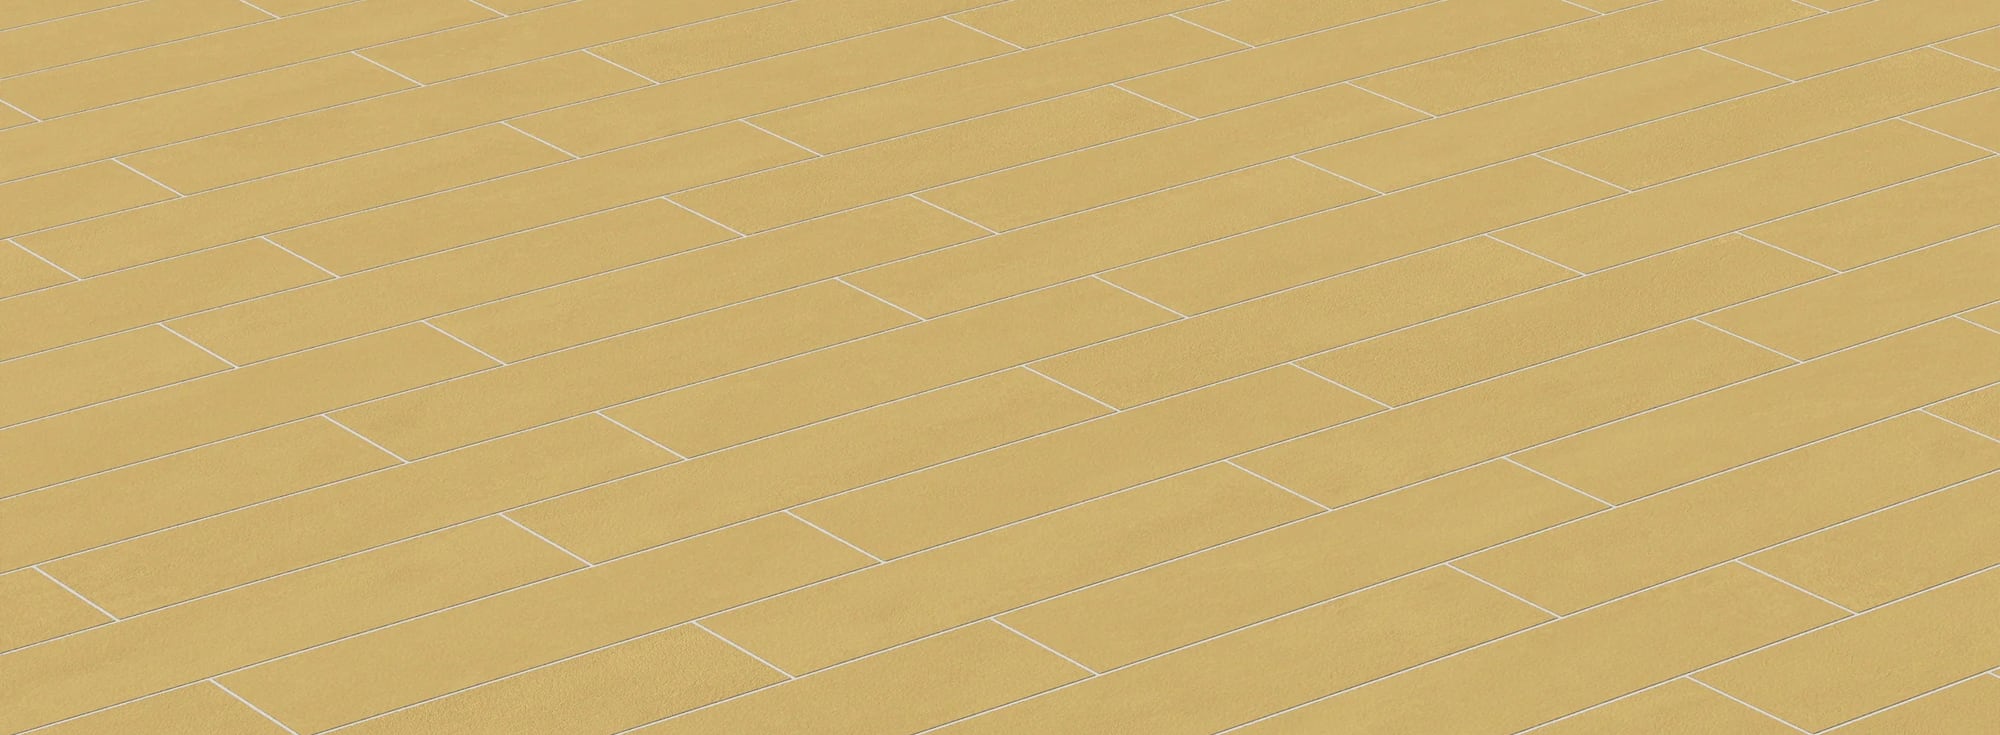 Vibrant yellow tile in a diagonal layout, infusing a sunny and modern aesthetic into any space